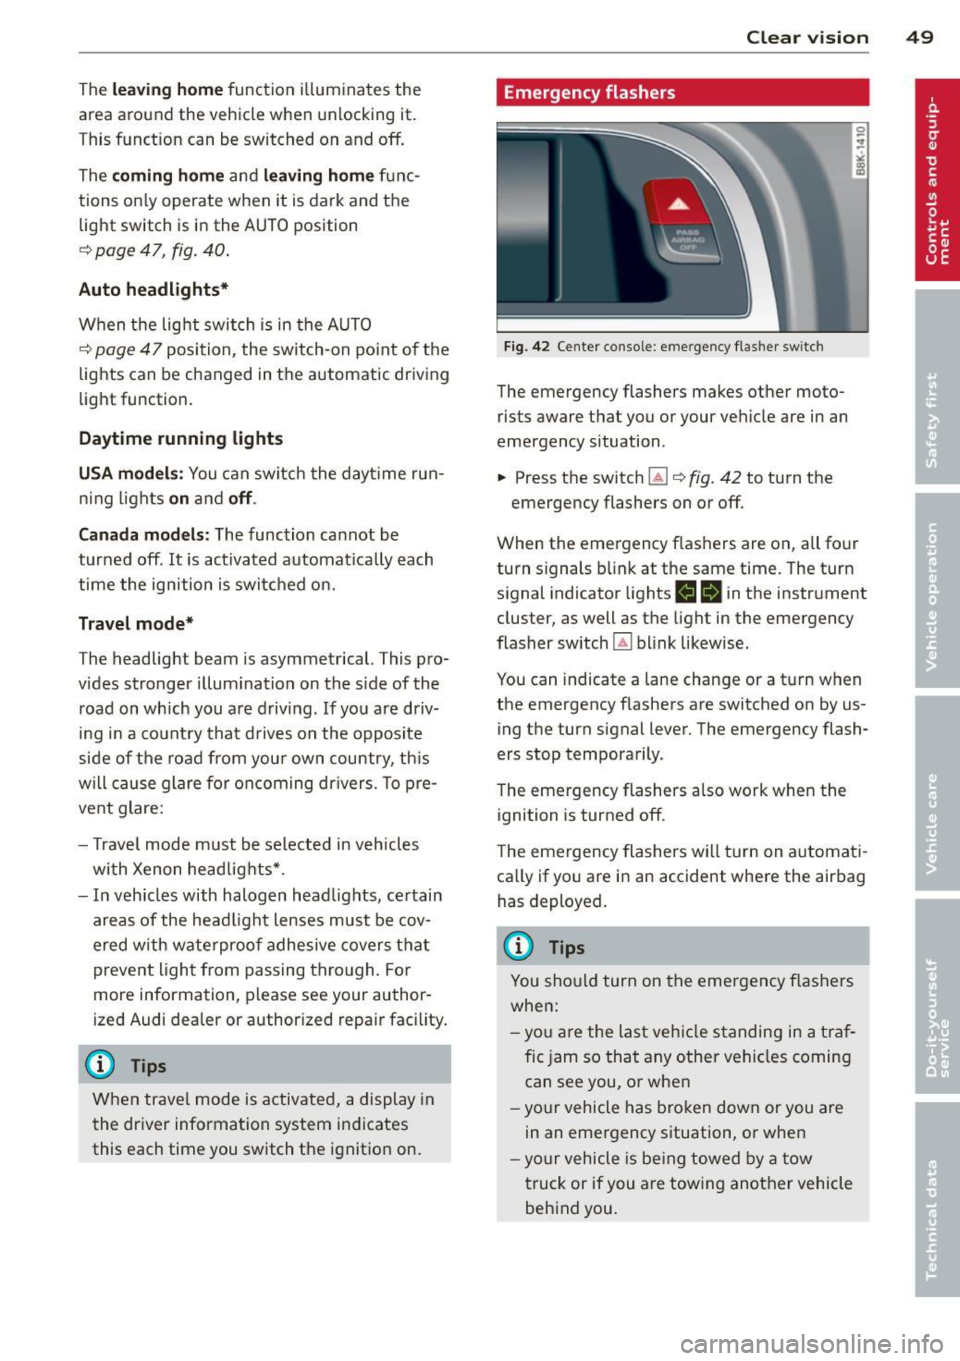 AUDI S4 2013  Owners Manual The leavin g home function  i lluminates  the 
area  around  the  vehicle  when  unlock ing  it. 
T his  function  can  be  switched  on  and  off. 
The 
c o ming  h om e and lea ving home func­
tion